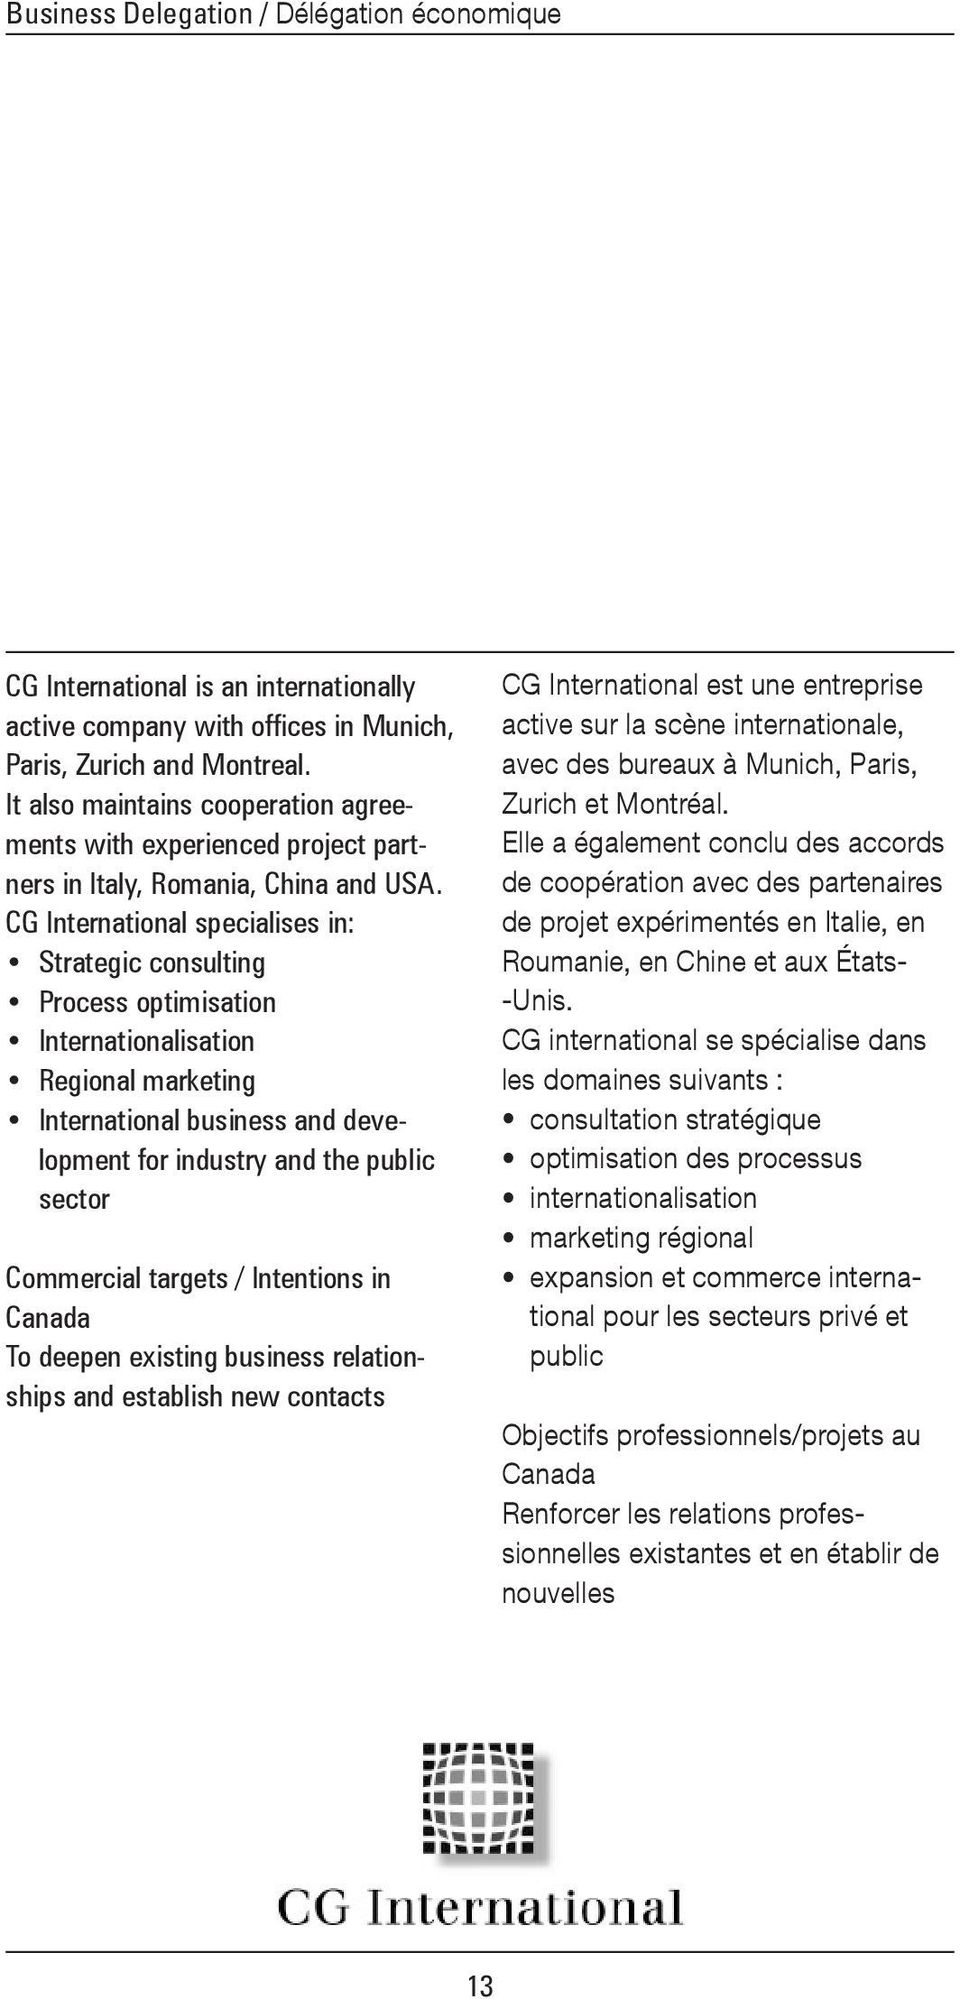 CG International specialises in: Strategic consulting Process optimisation Internationalisation Regional marketing International business and development for industry and the public sector Commercial